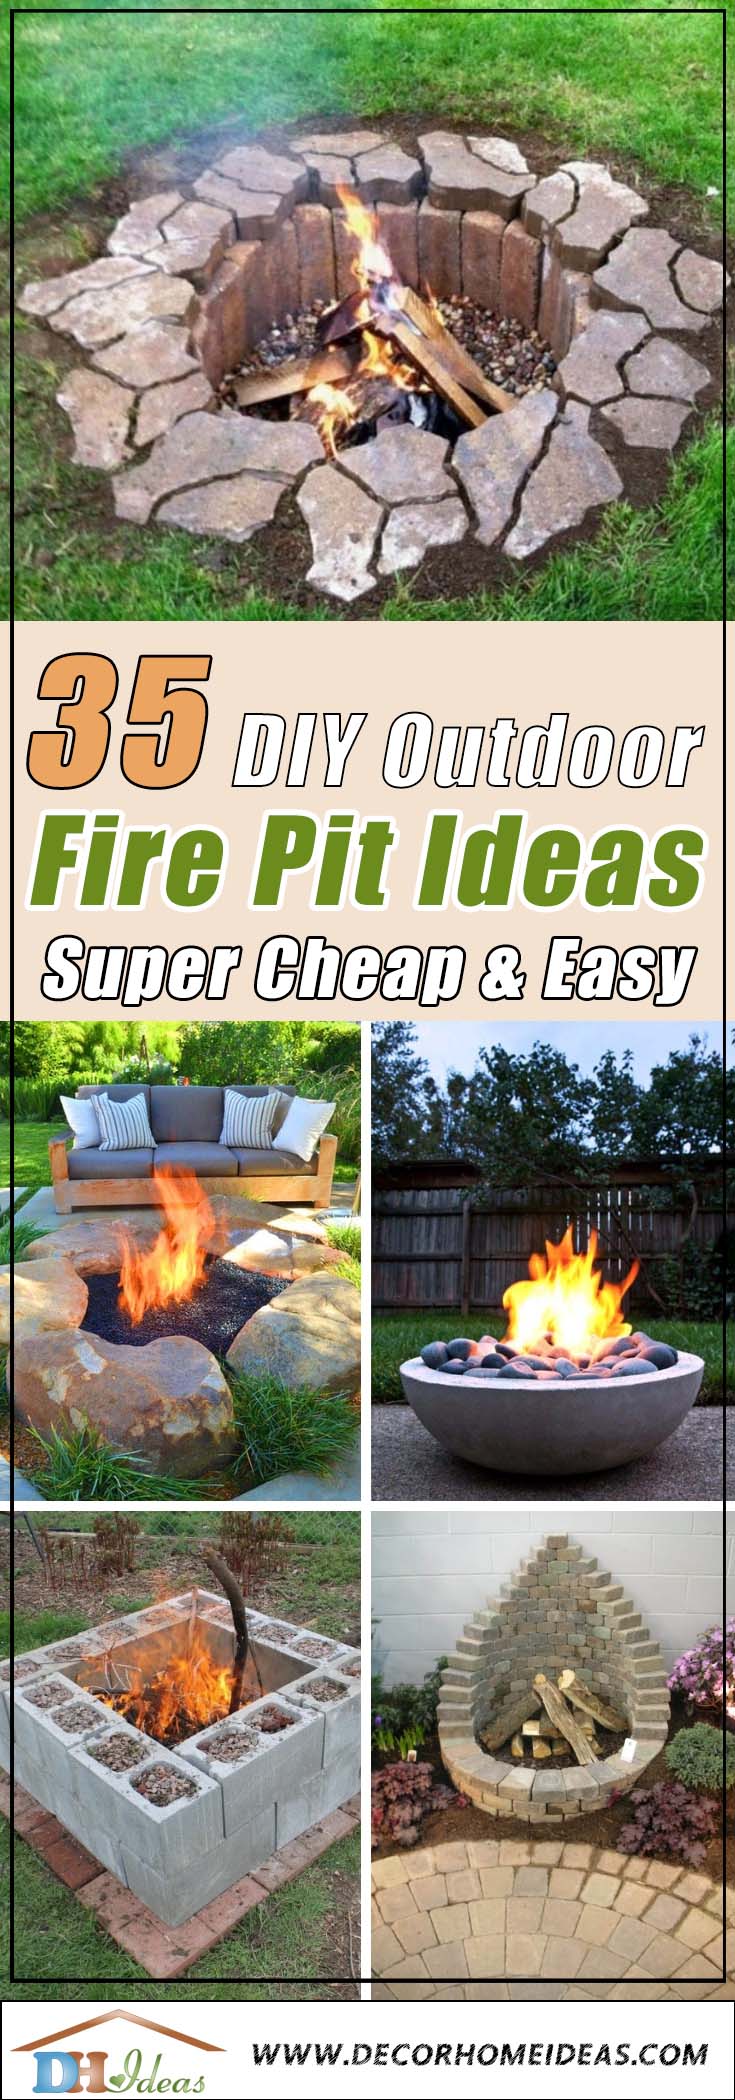 35 Easy To Do Fire Pit Ideas And, Diy Propane Fire Pit Ideas